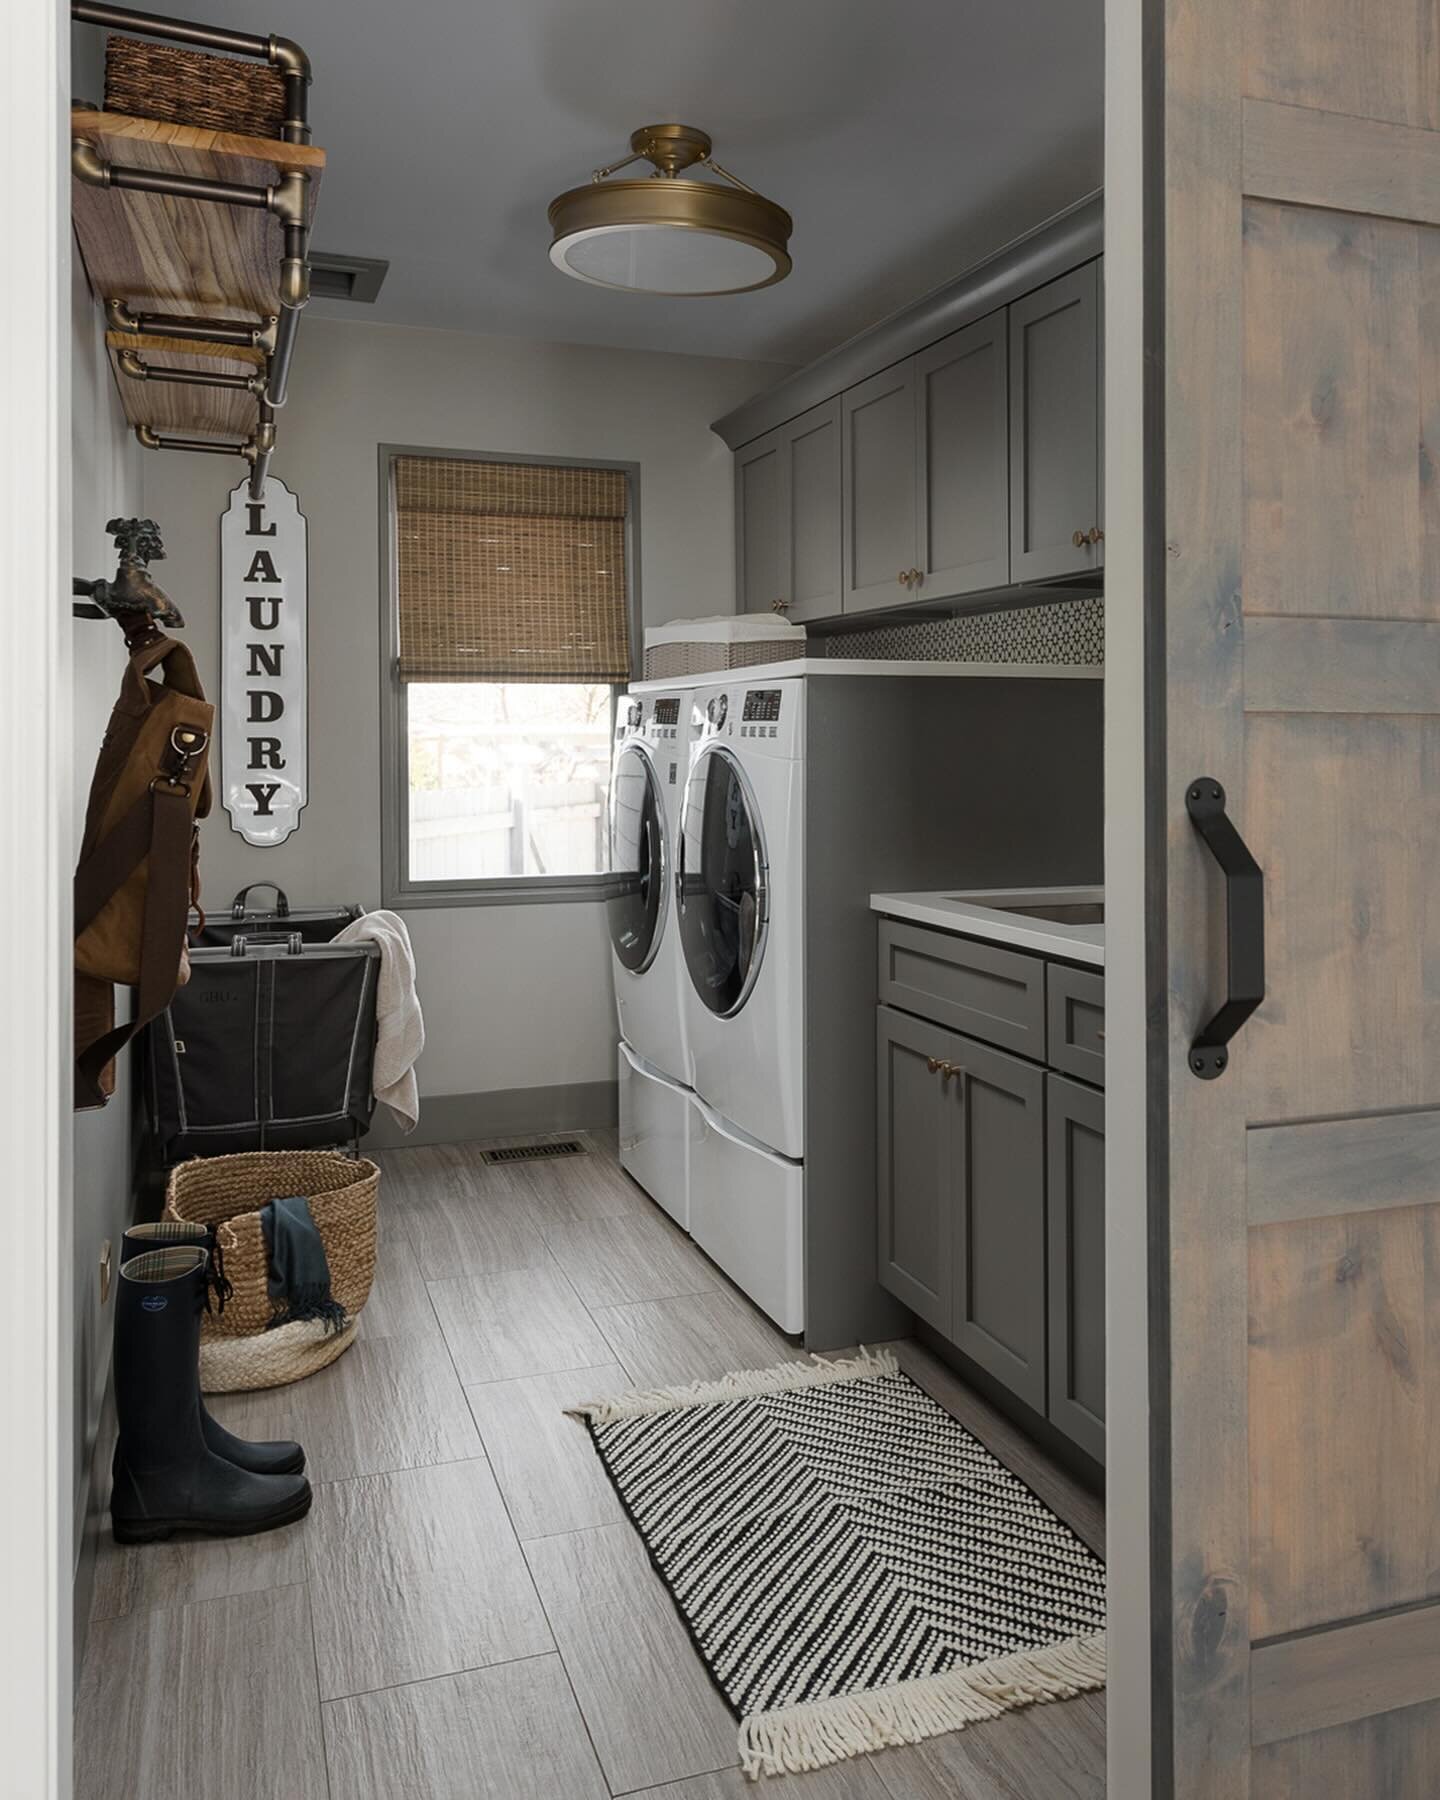 As we begin to thaw out and temps rise (at least for now), a mud-friendly mudroom or laundry room is a must!

#ChadEsslingerDesignShiftingGears
Photos by @pictureperfecthouse